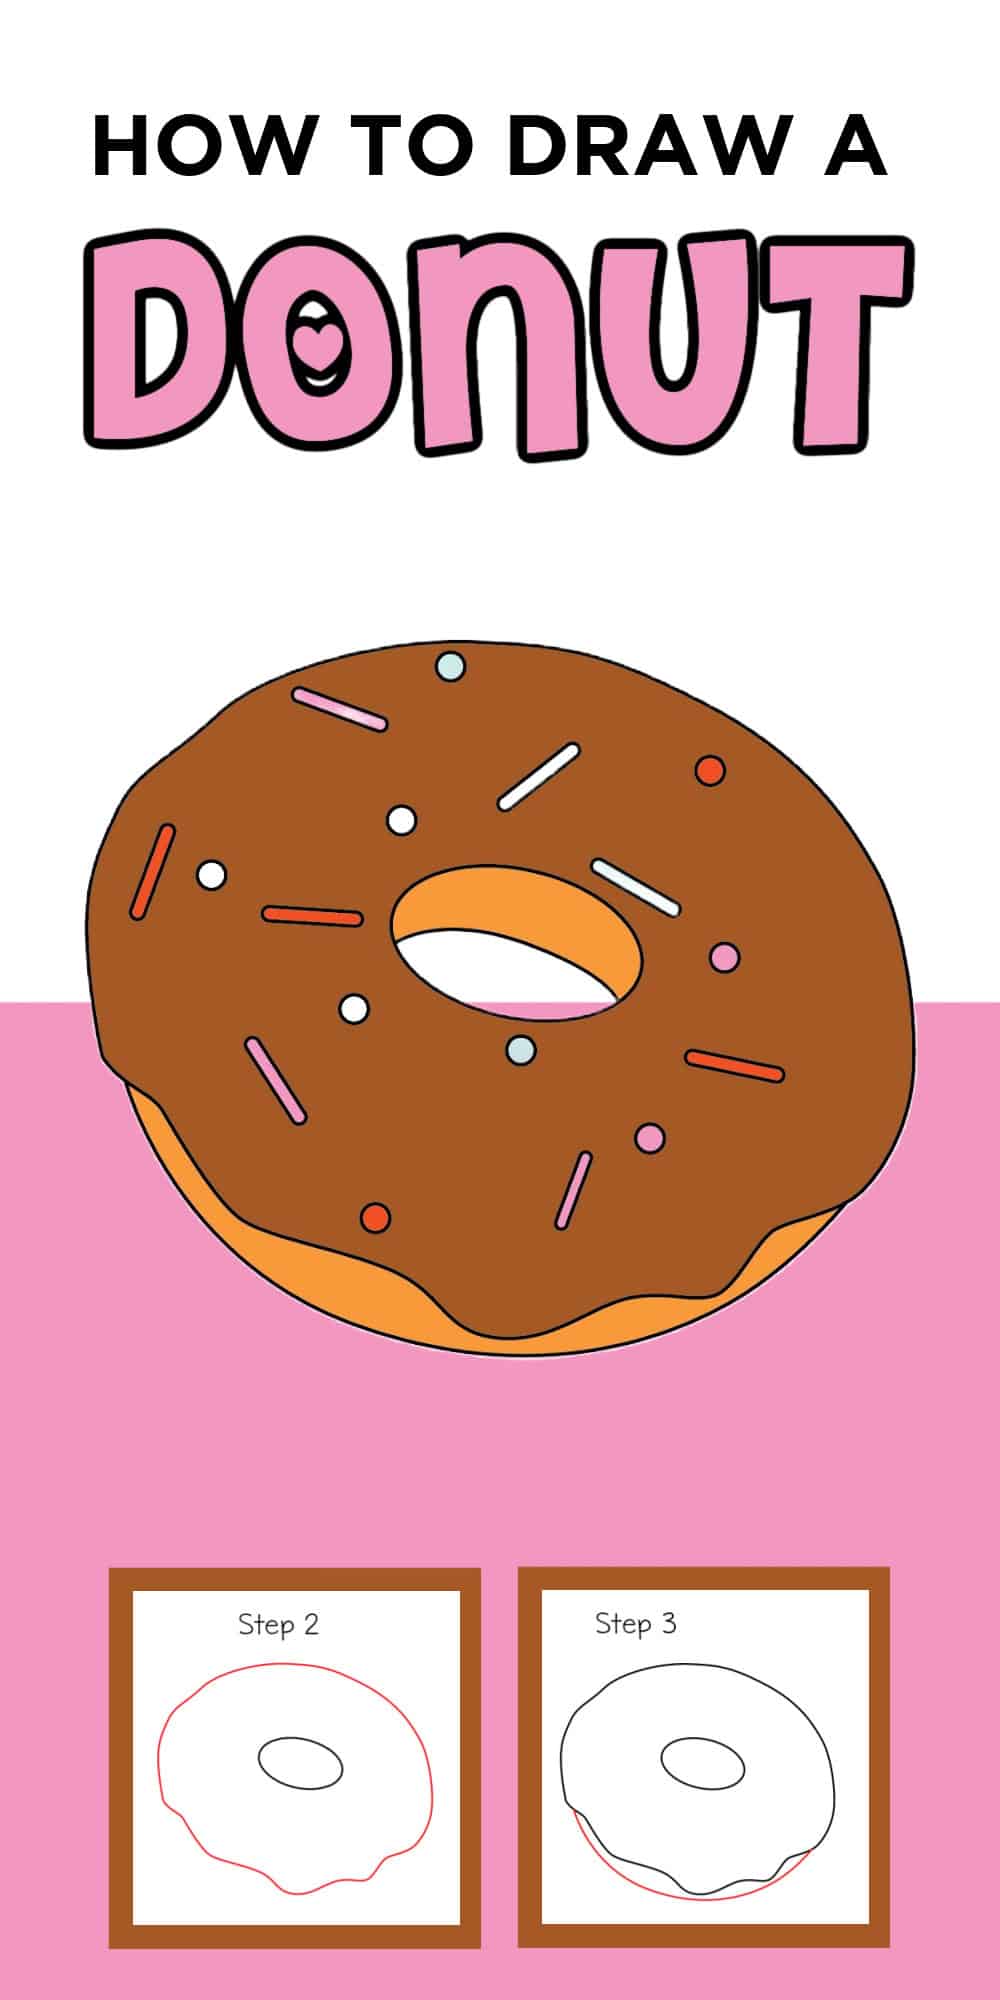 Drawing of a Donut